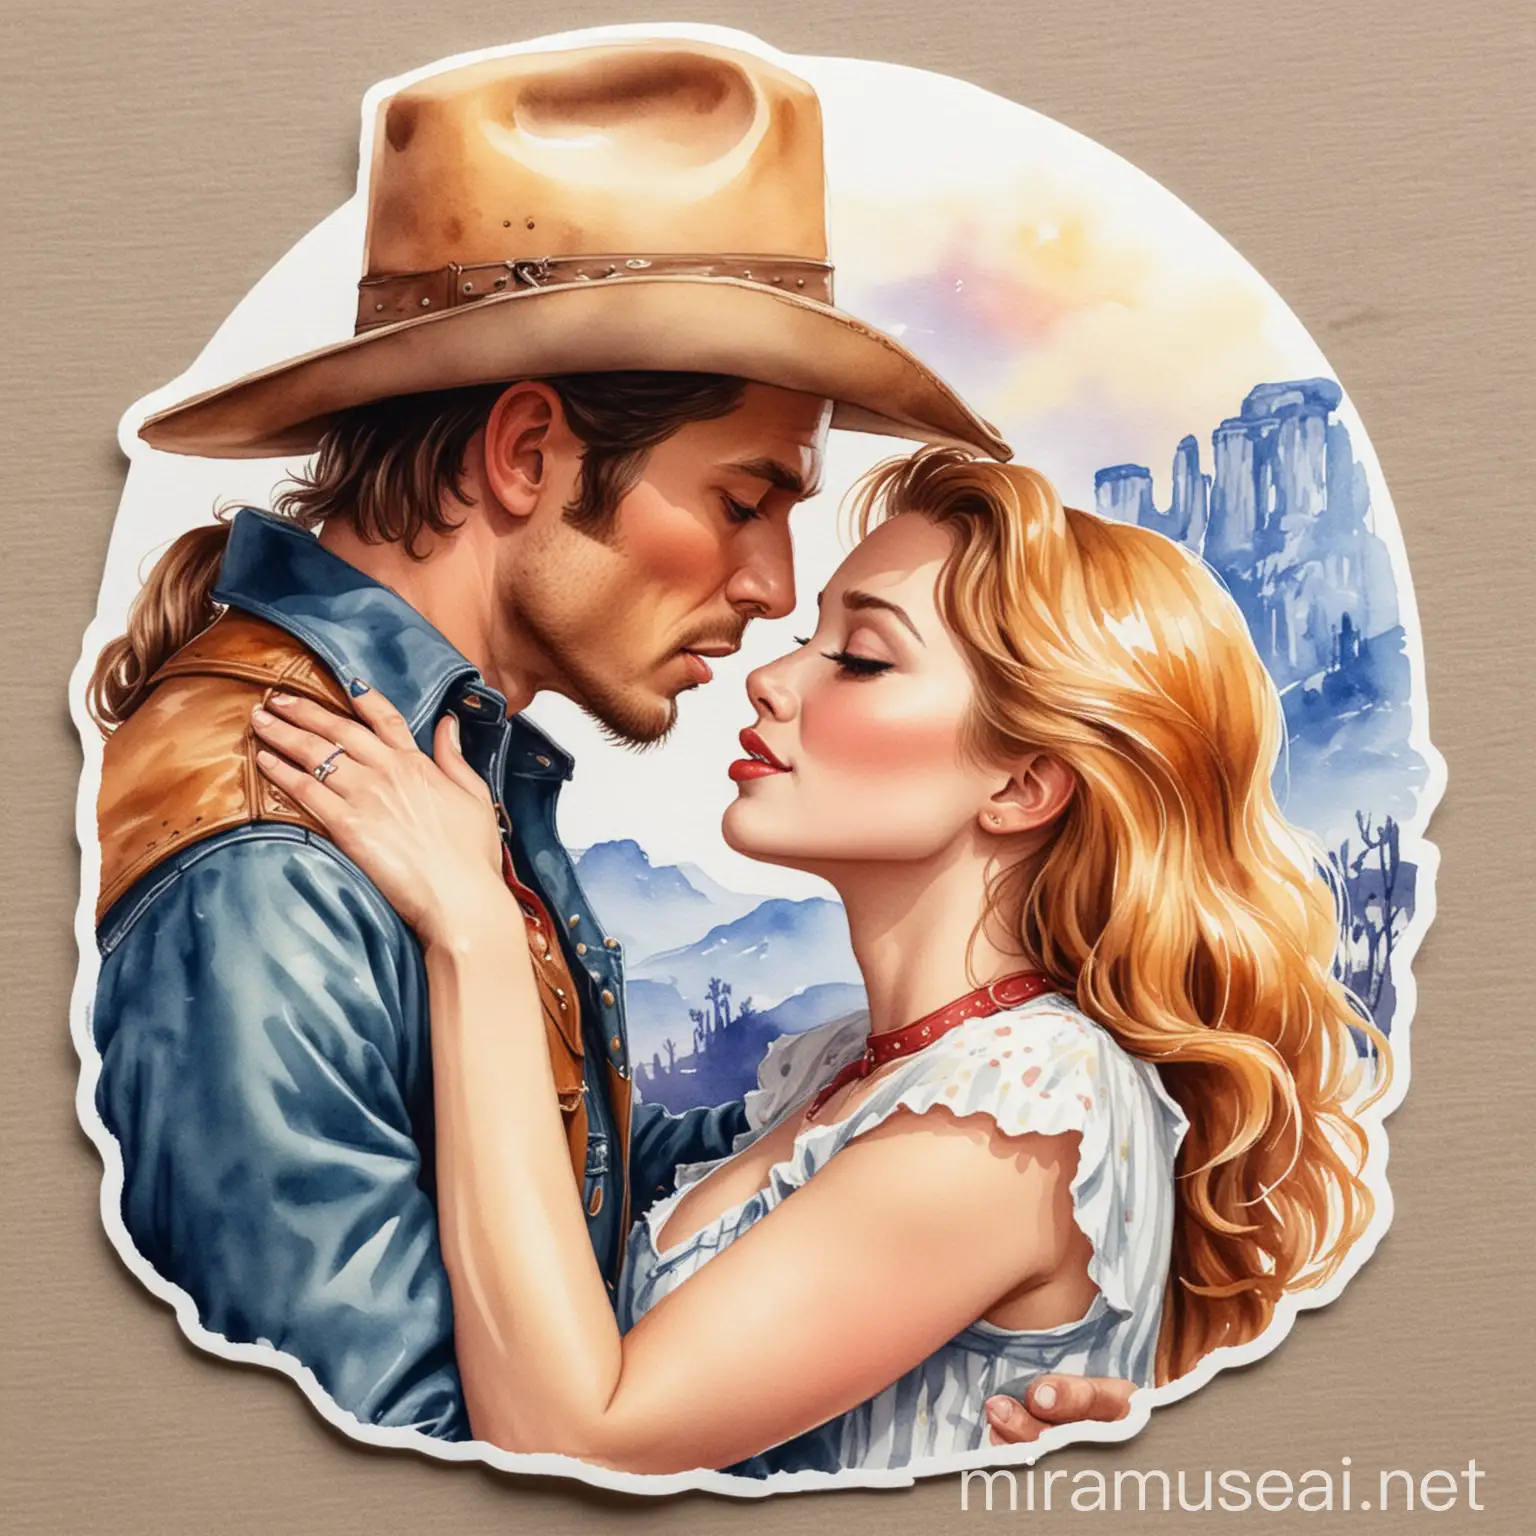 A higher quality watercolor illustration sticker of cowboy and girl kissing romance in watercolor paint format in classic hollywood style 